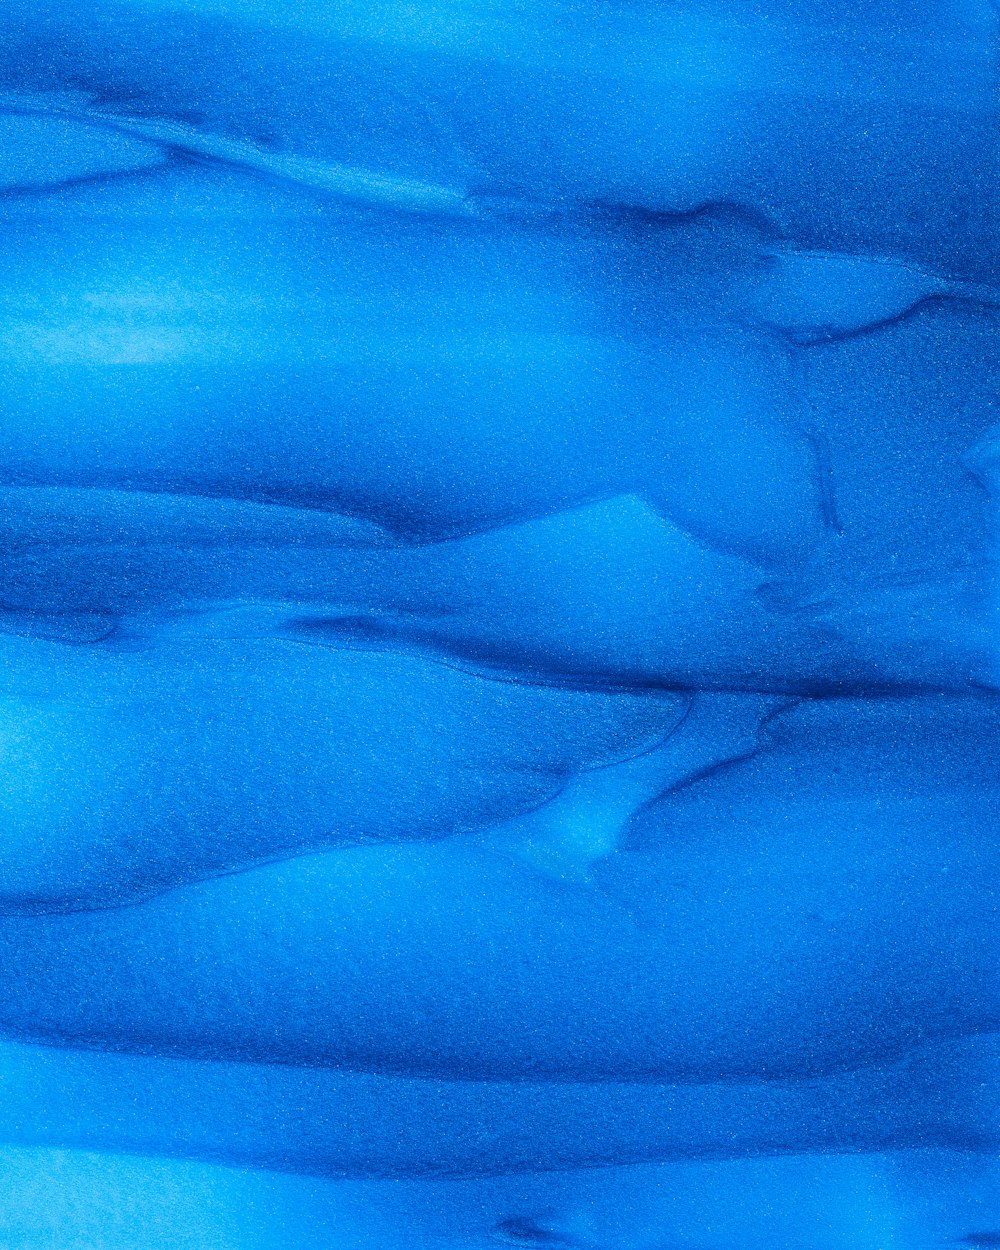 a close up of a blue substance in the water